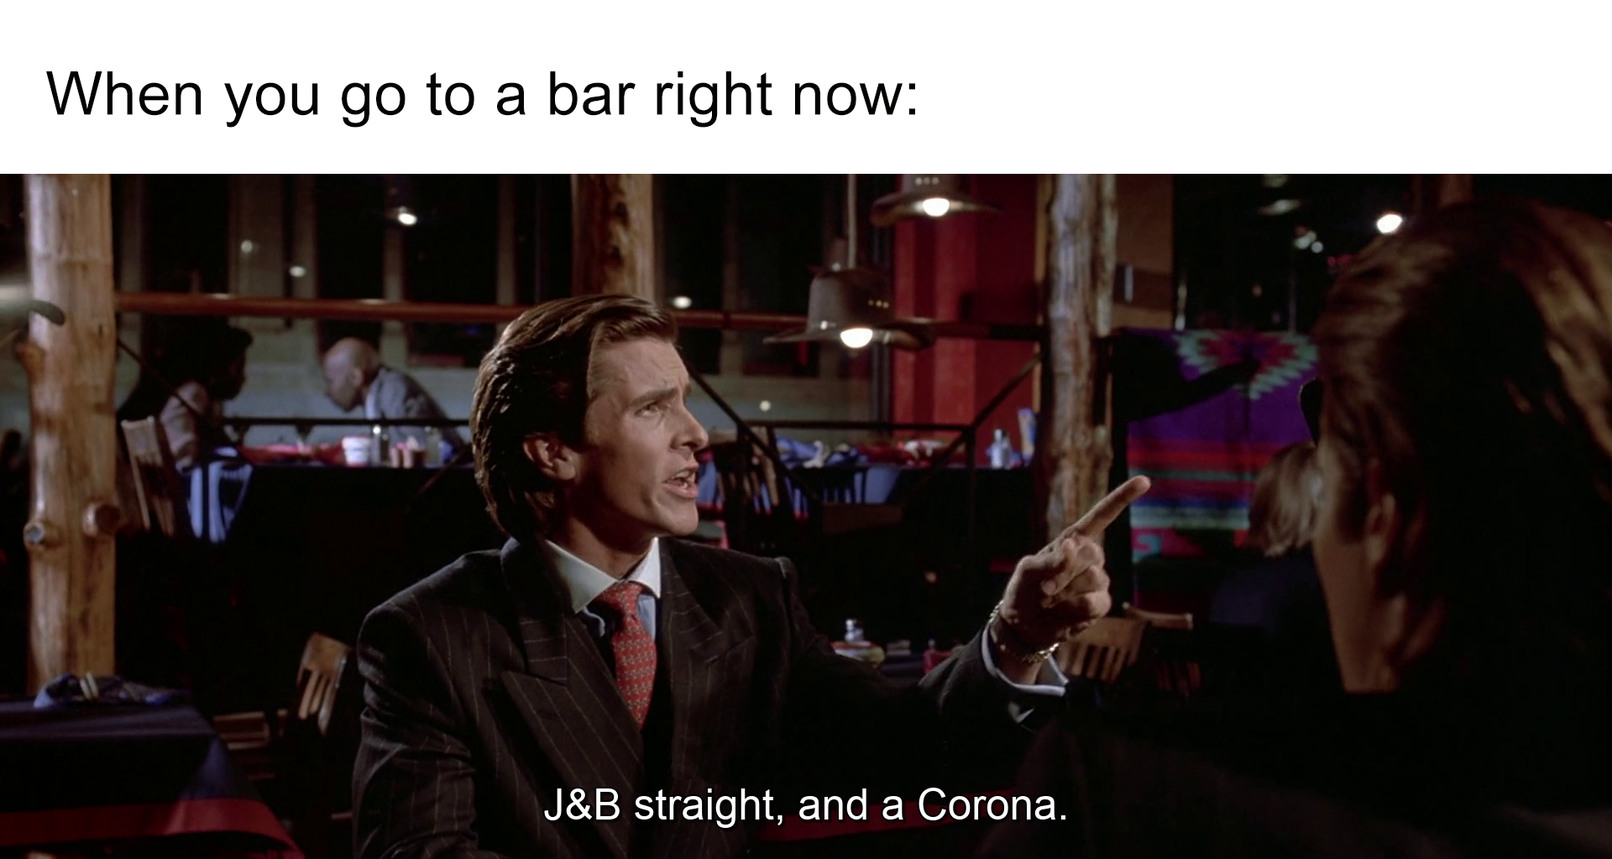 Going to a bar right now - meme